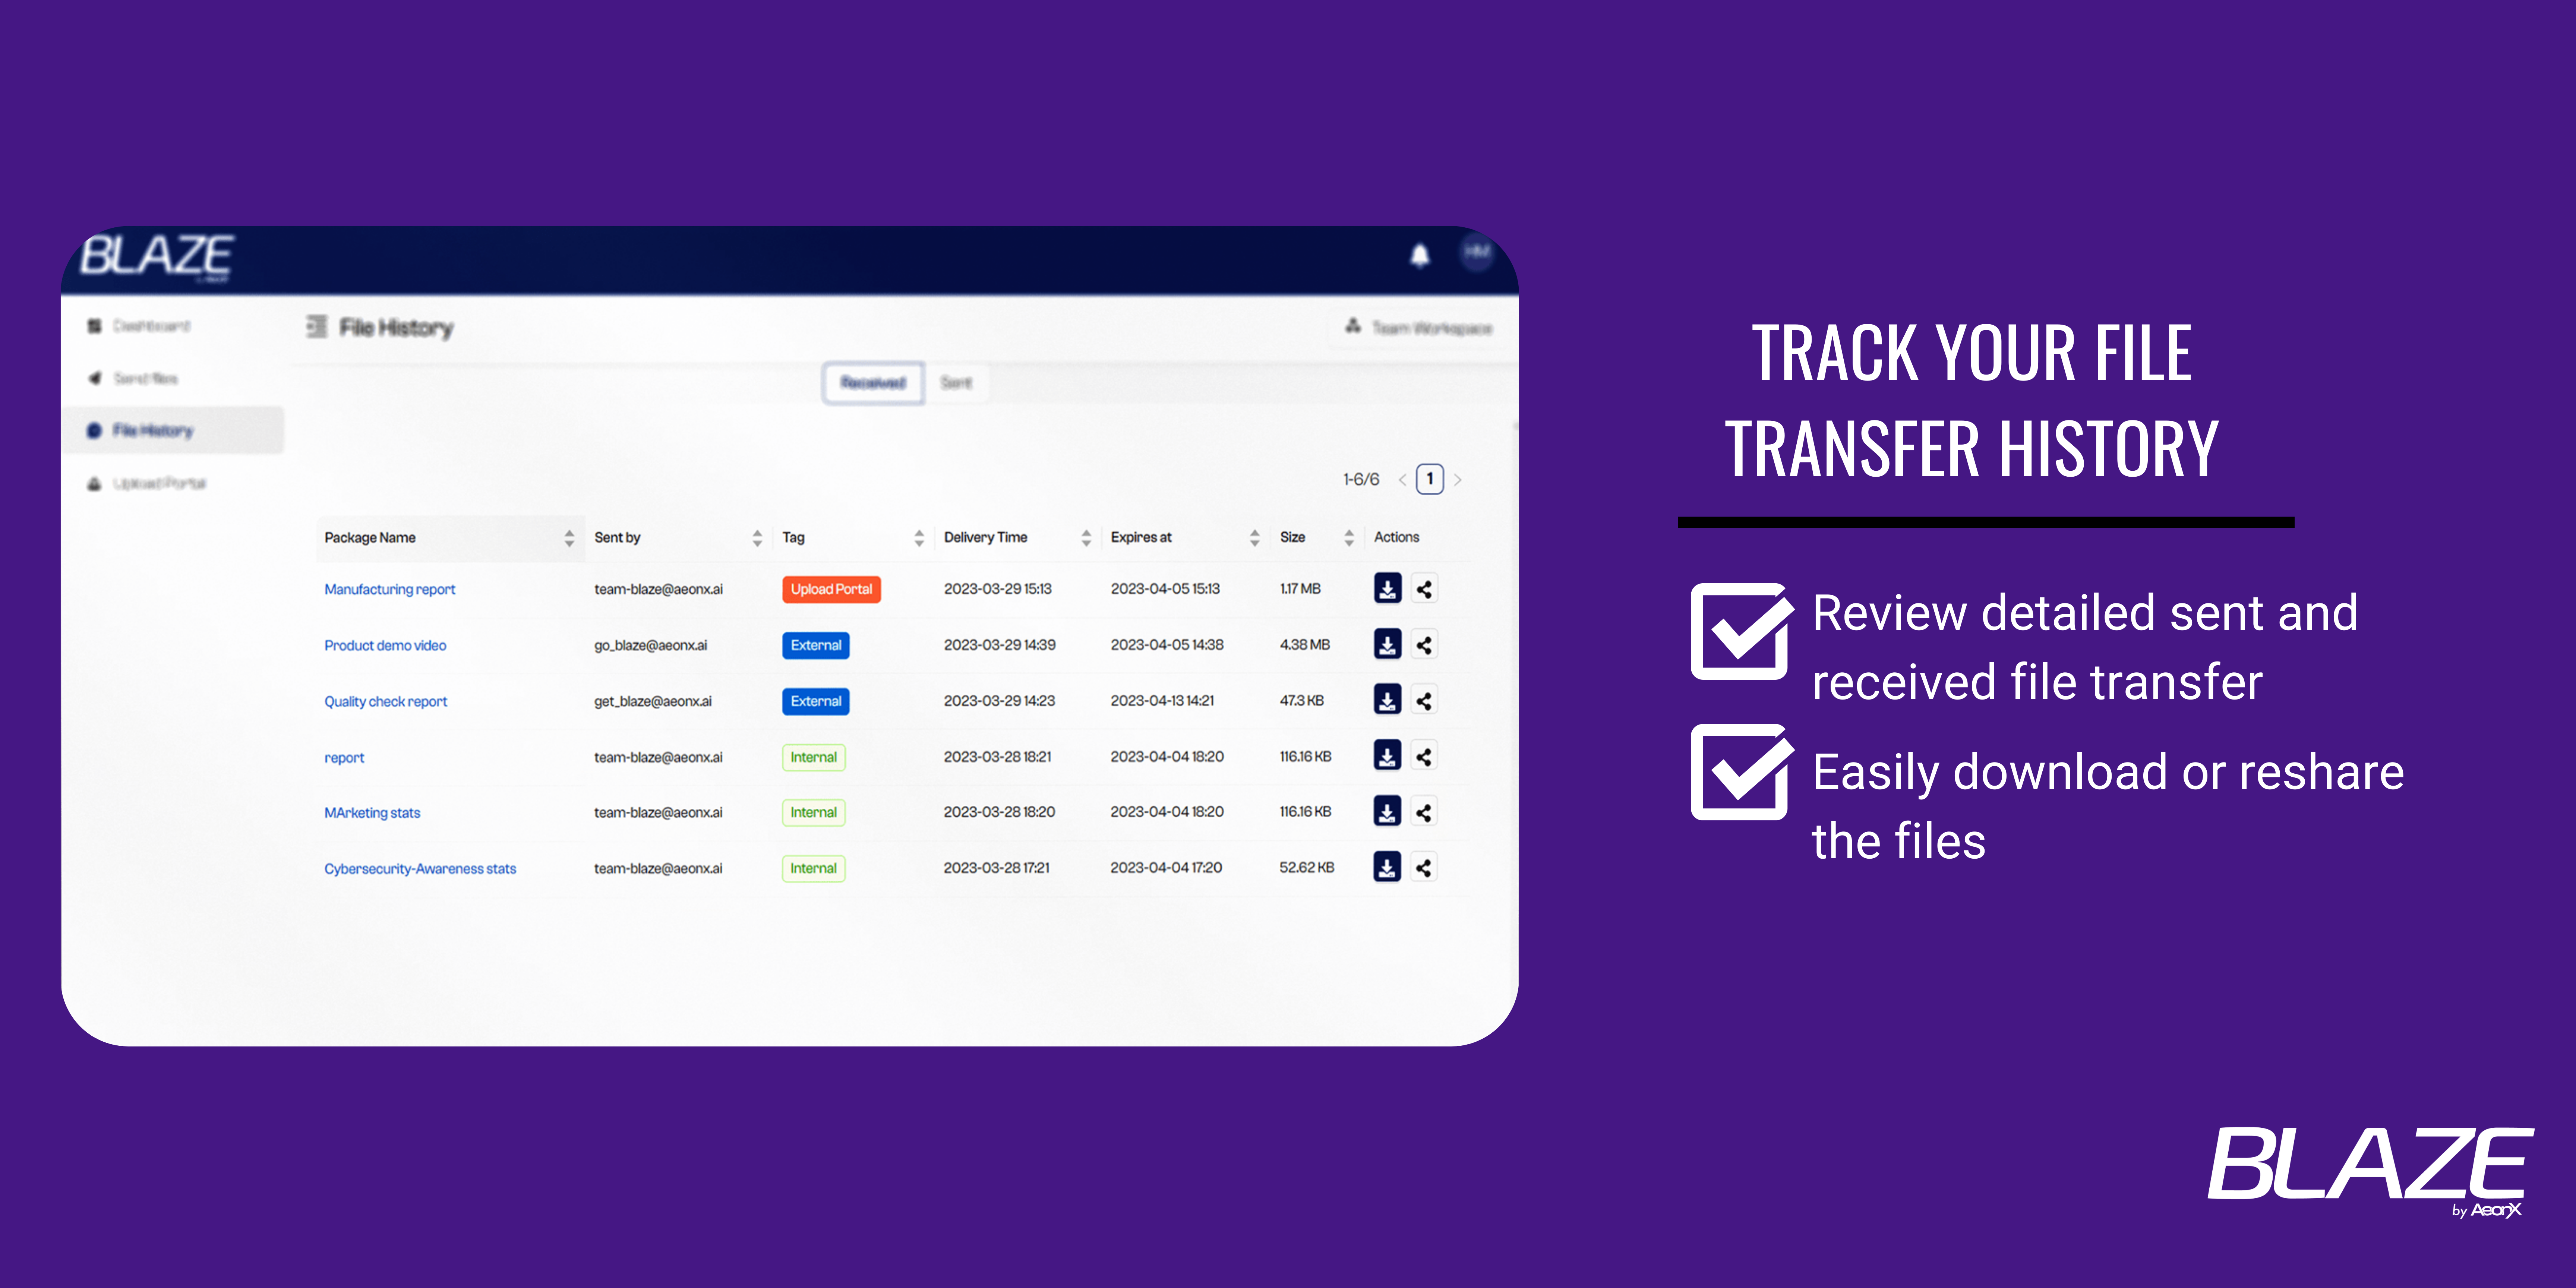 Track your file transfer history